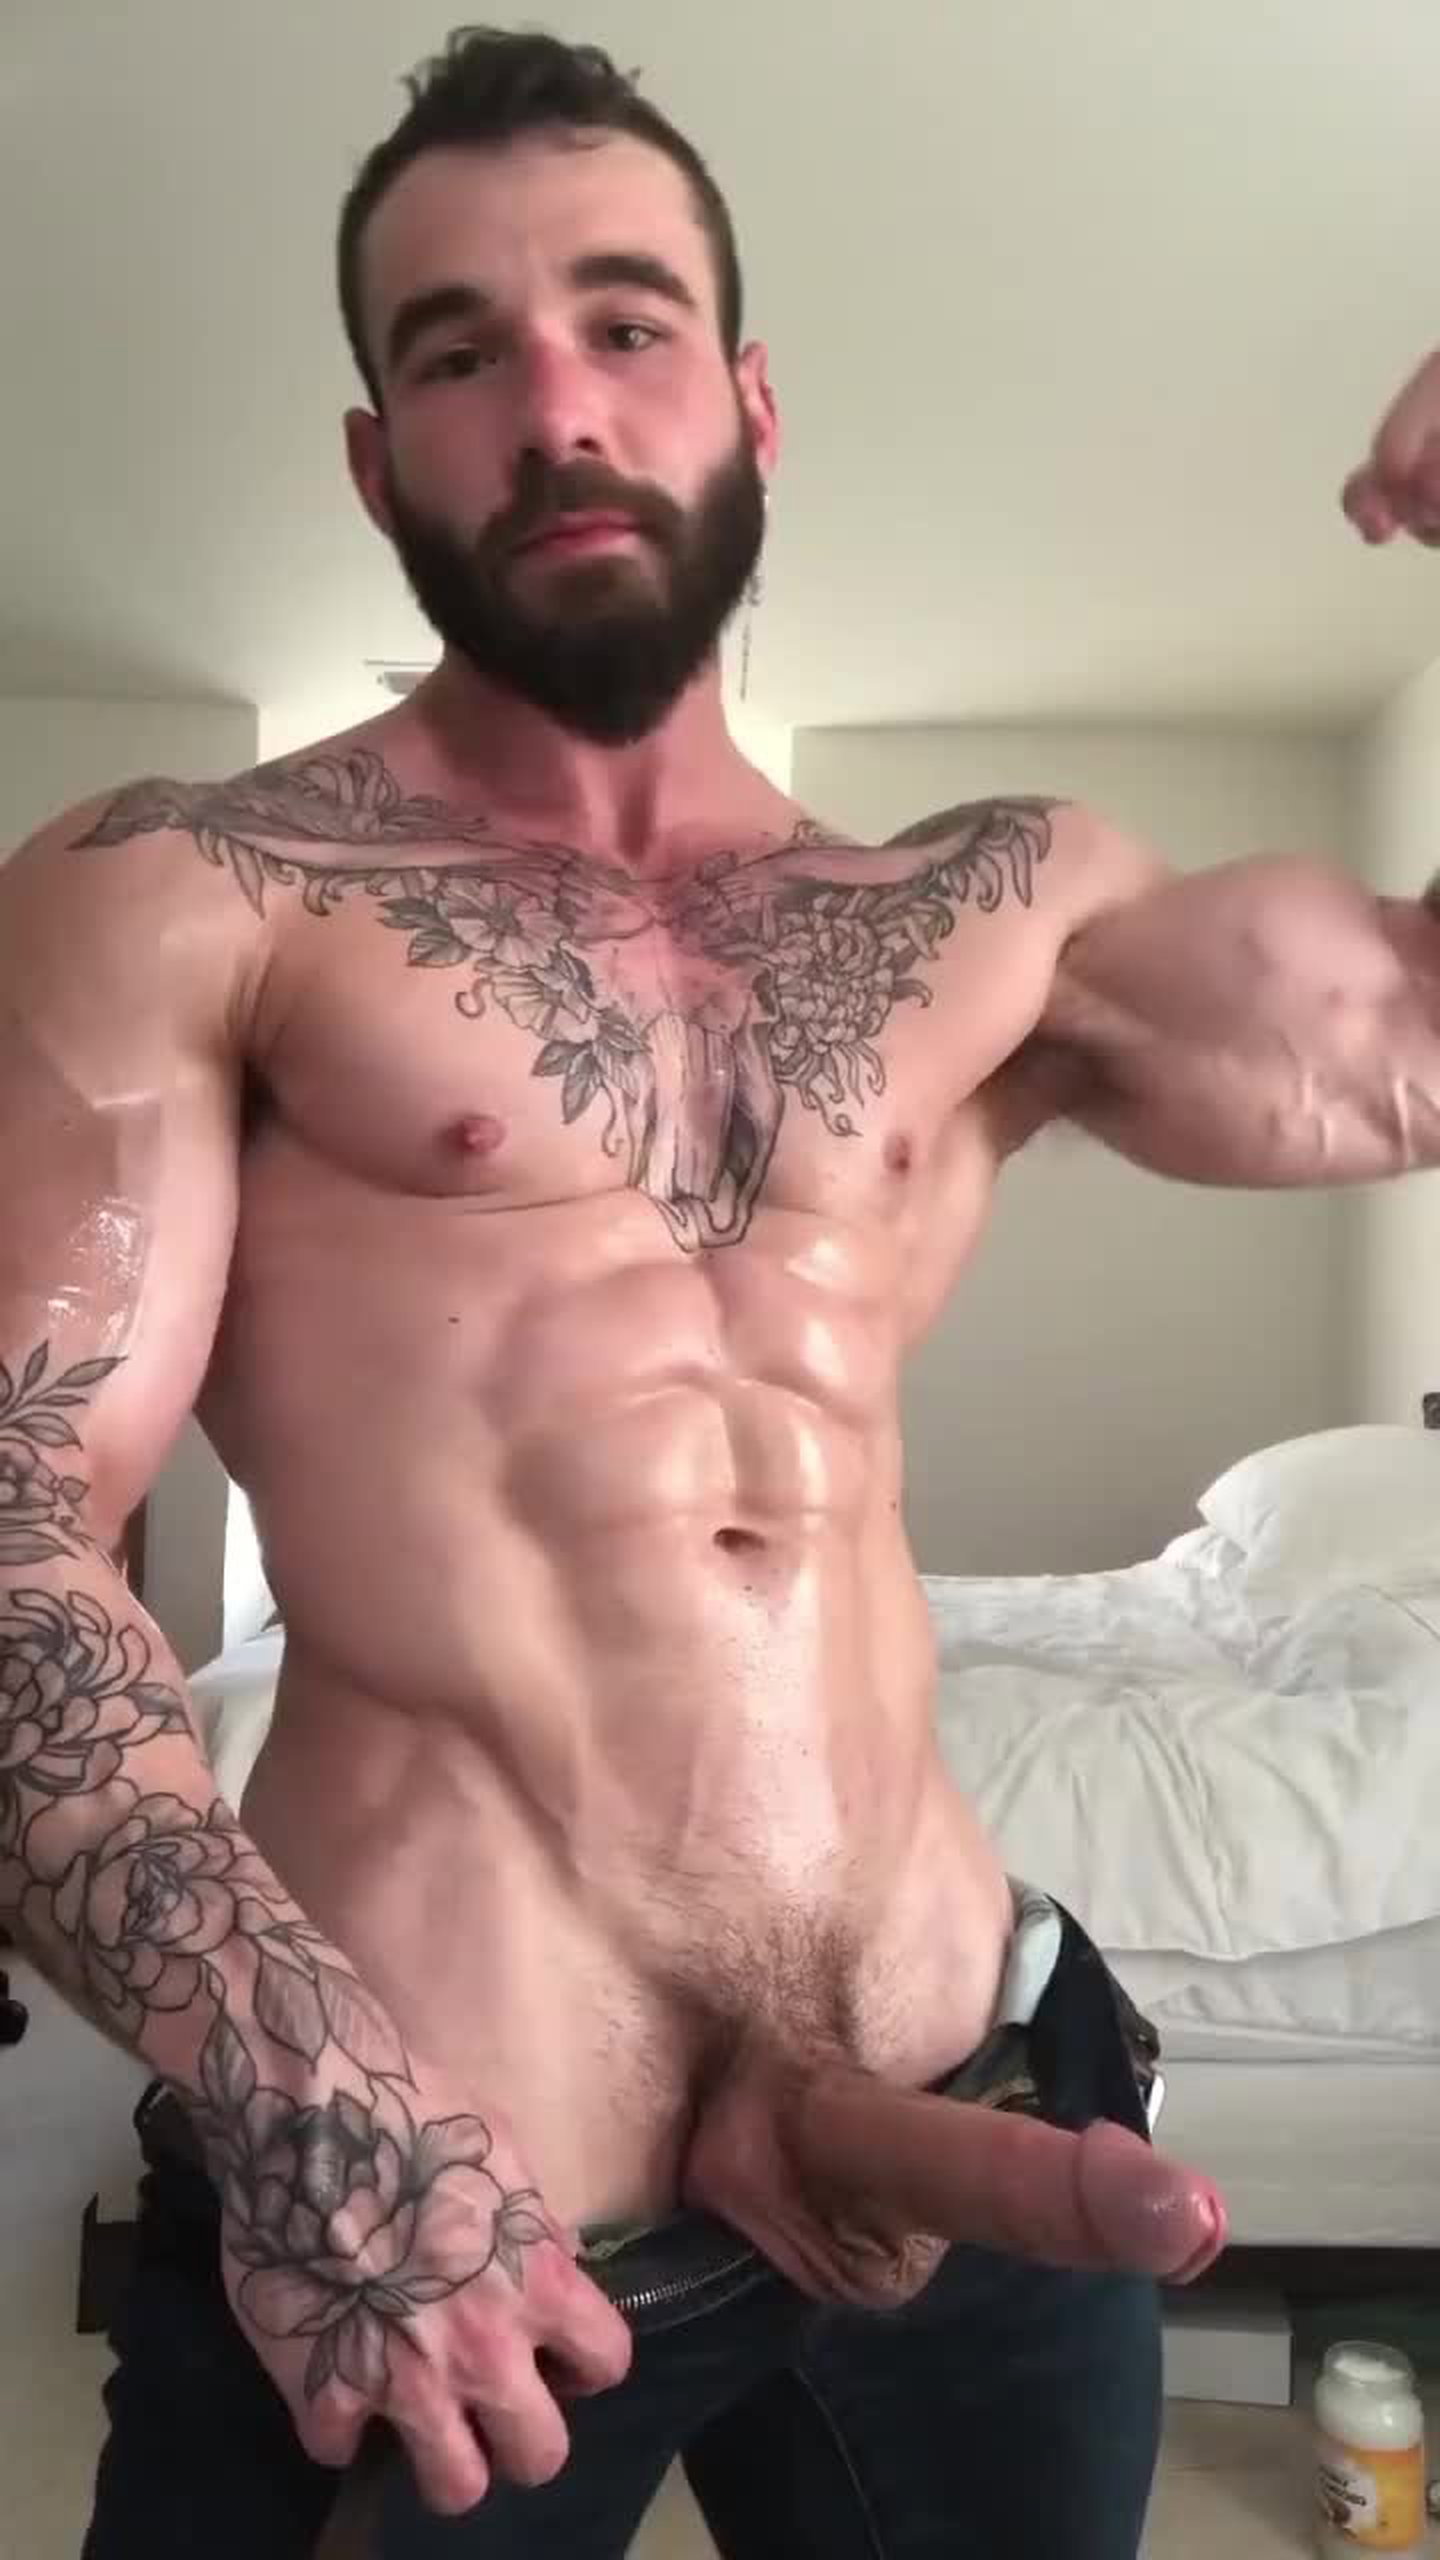 Video post by bxhornedmusclebator